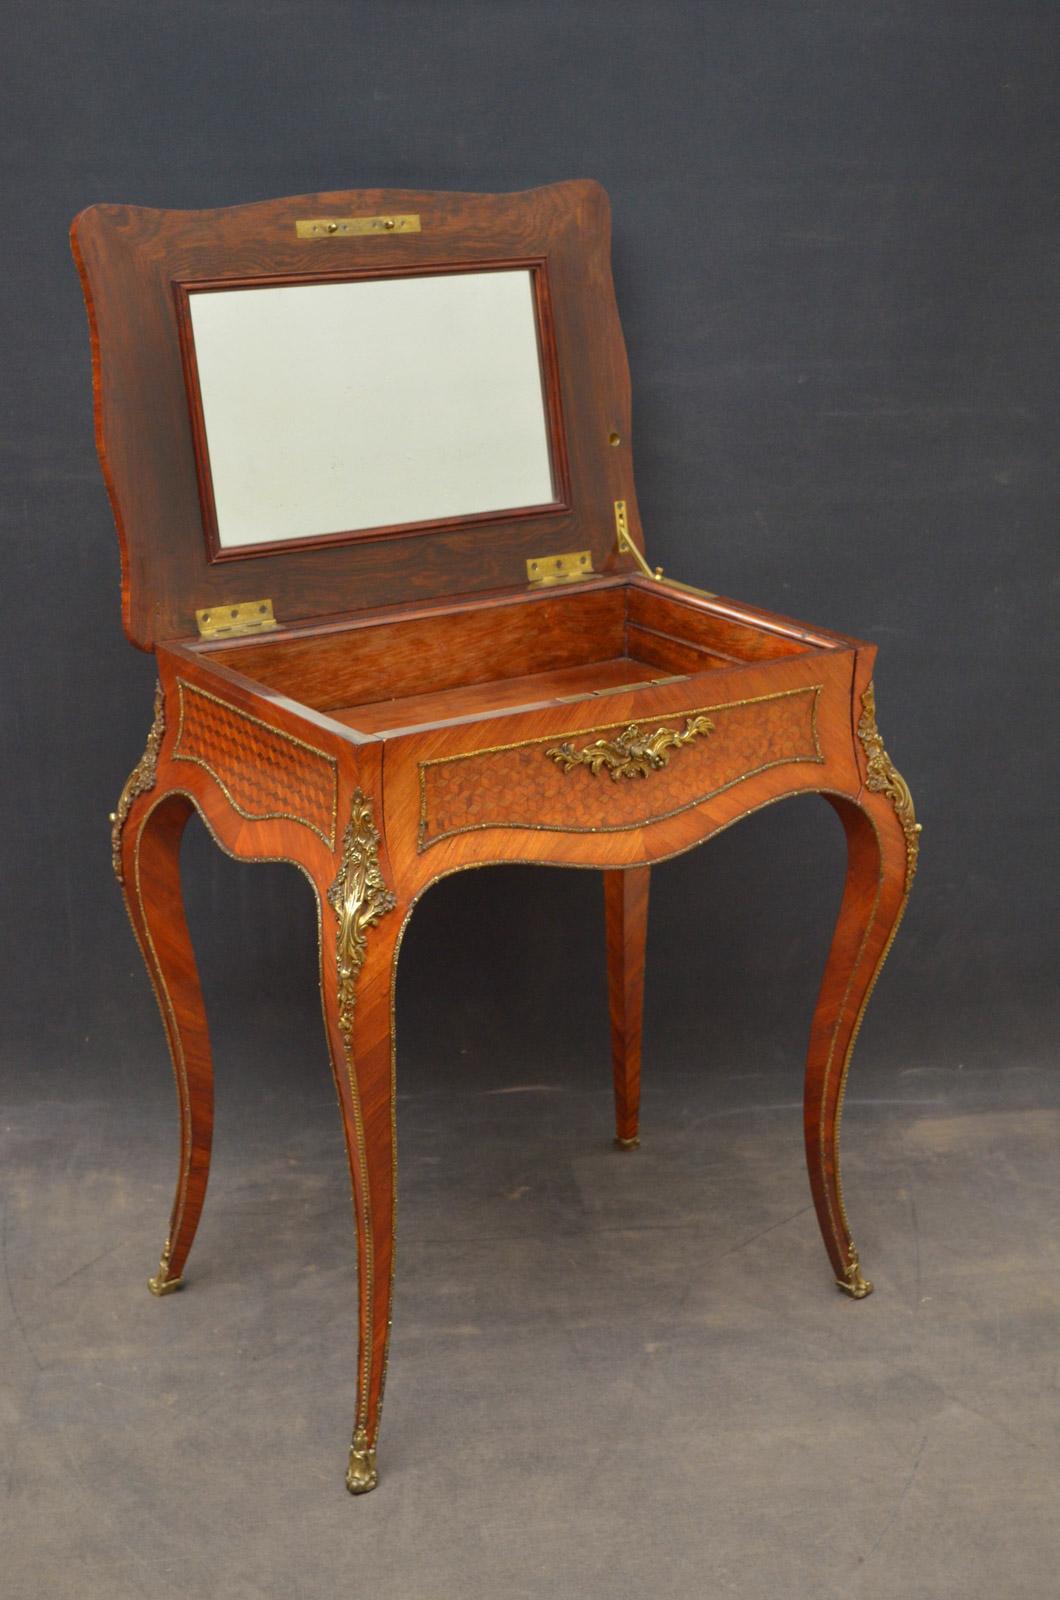 Exceptional Louis XV Design Kingwood Dressing Table In Excellent Condition For Sale In Whaley Bridge, GB